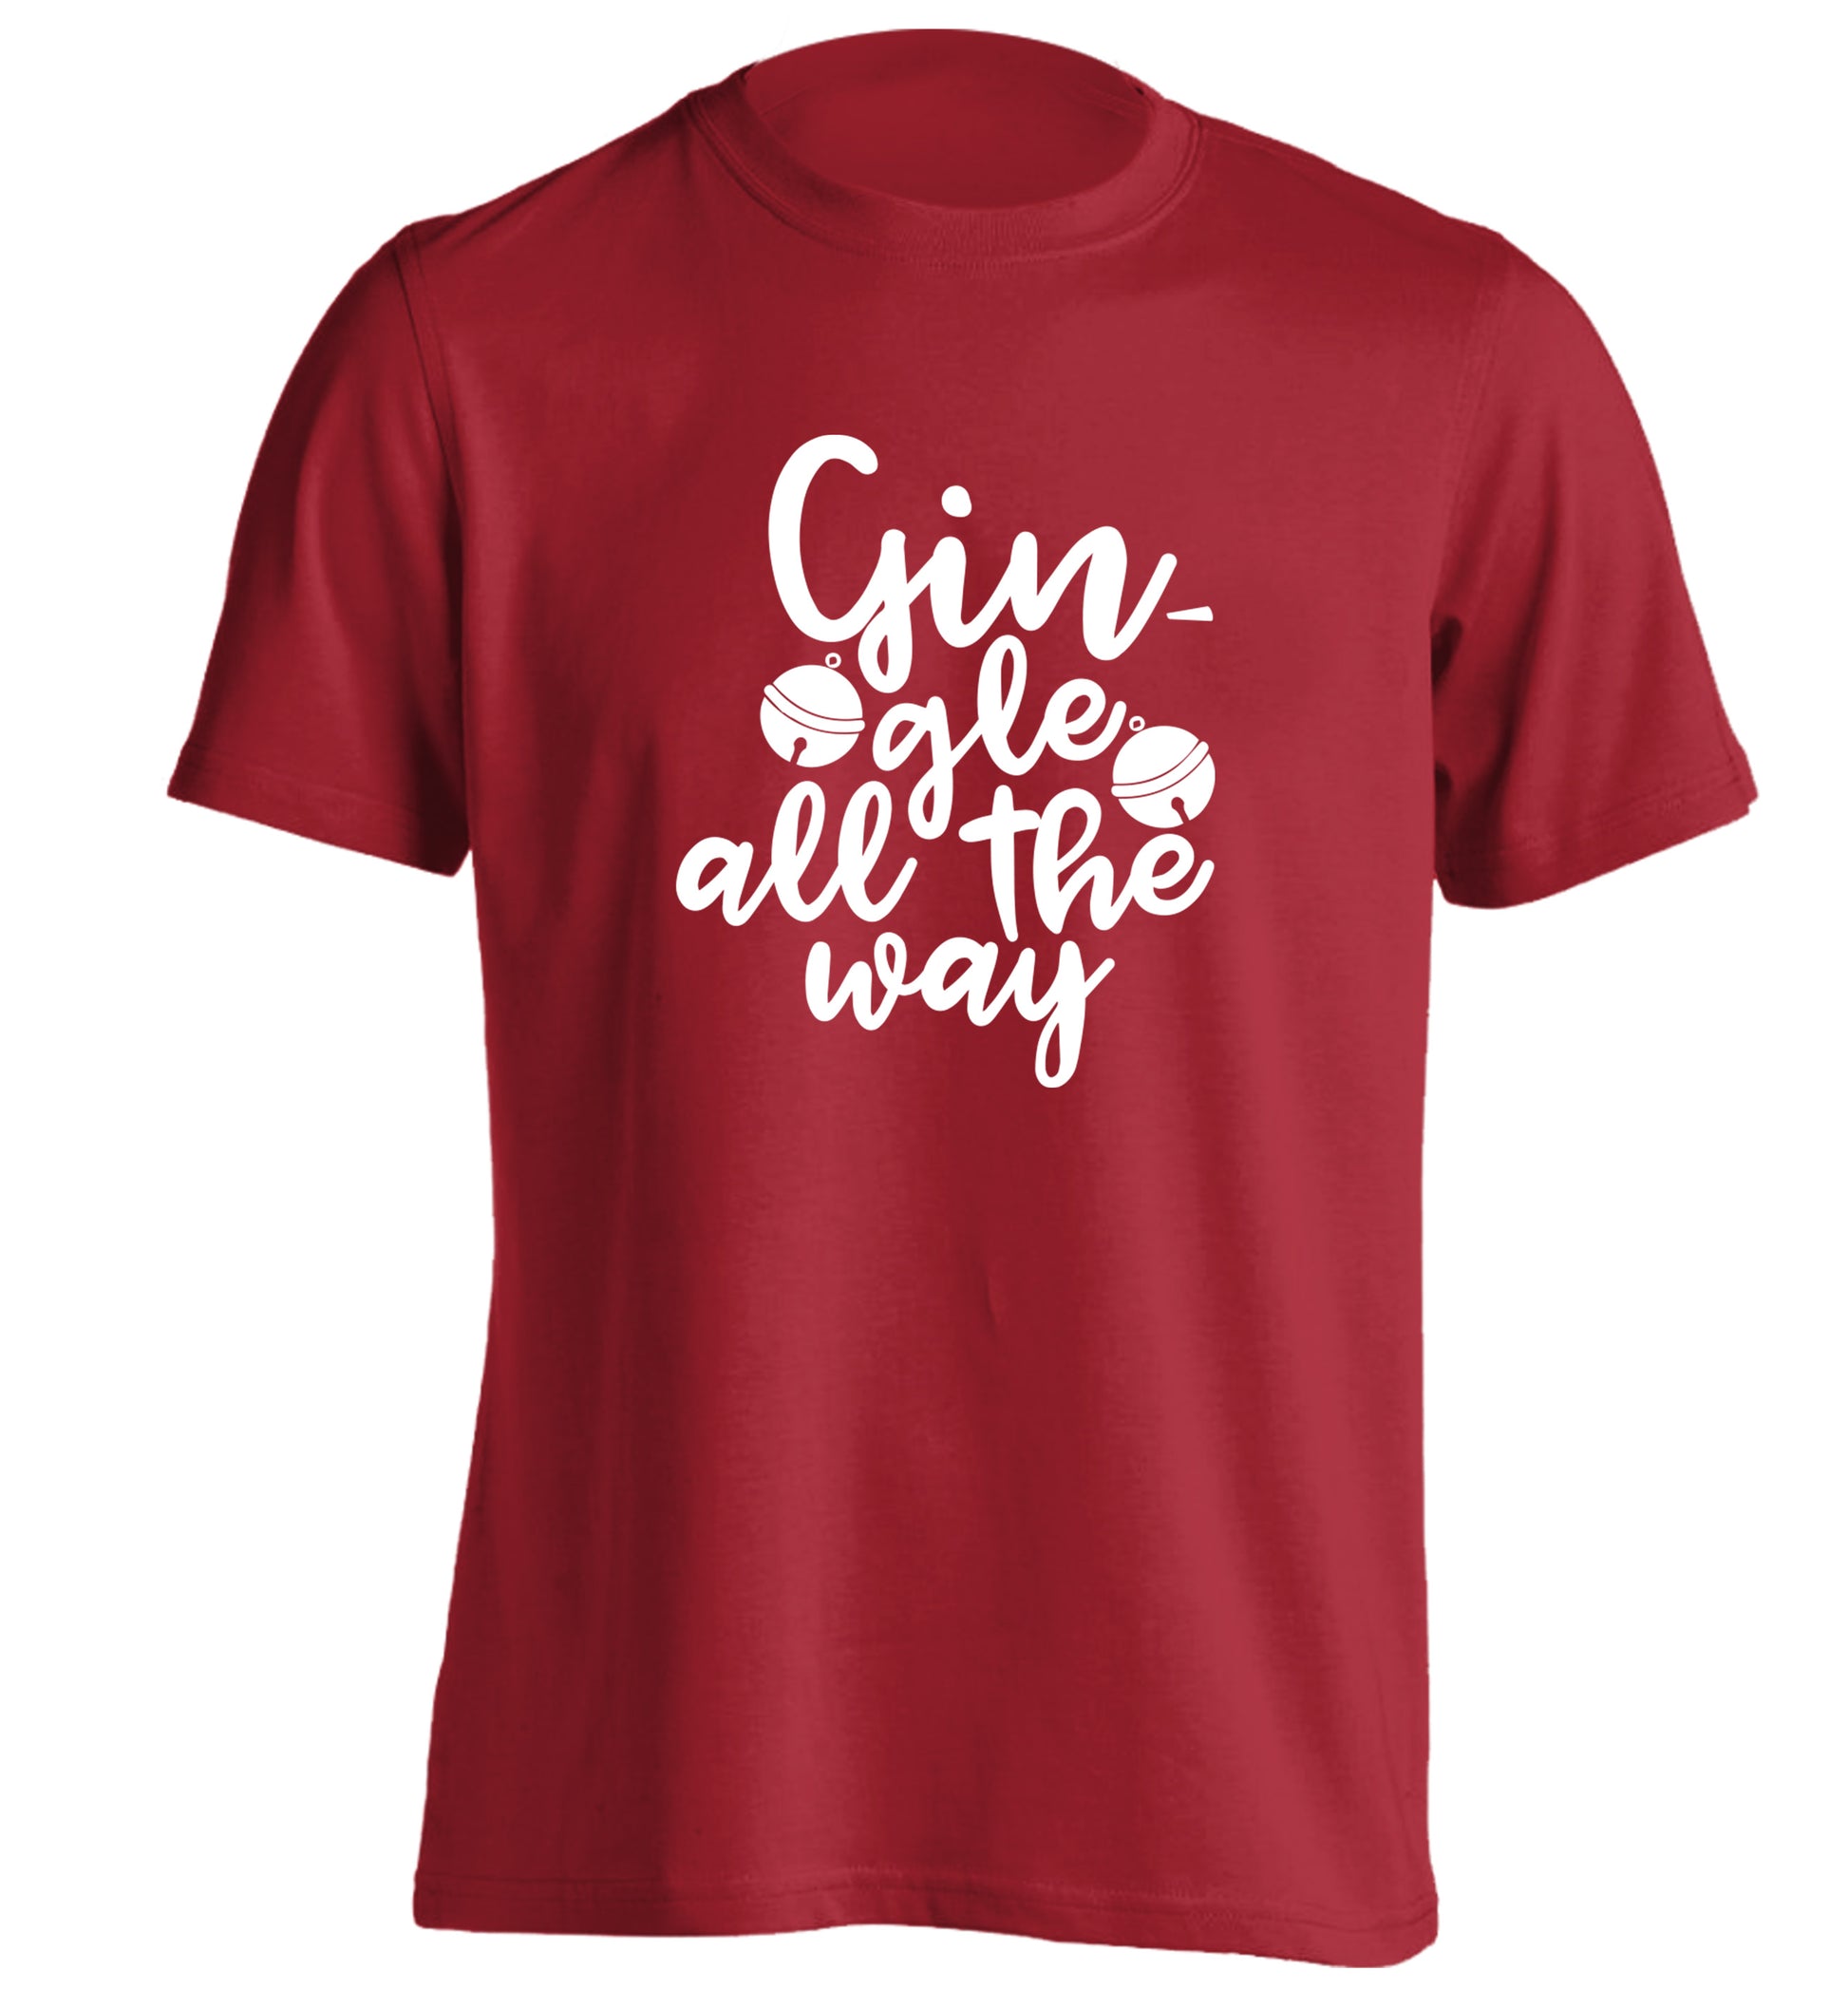 Gin-gle all the way adults unisex red Tshirt 2XL